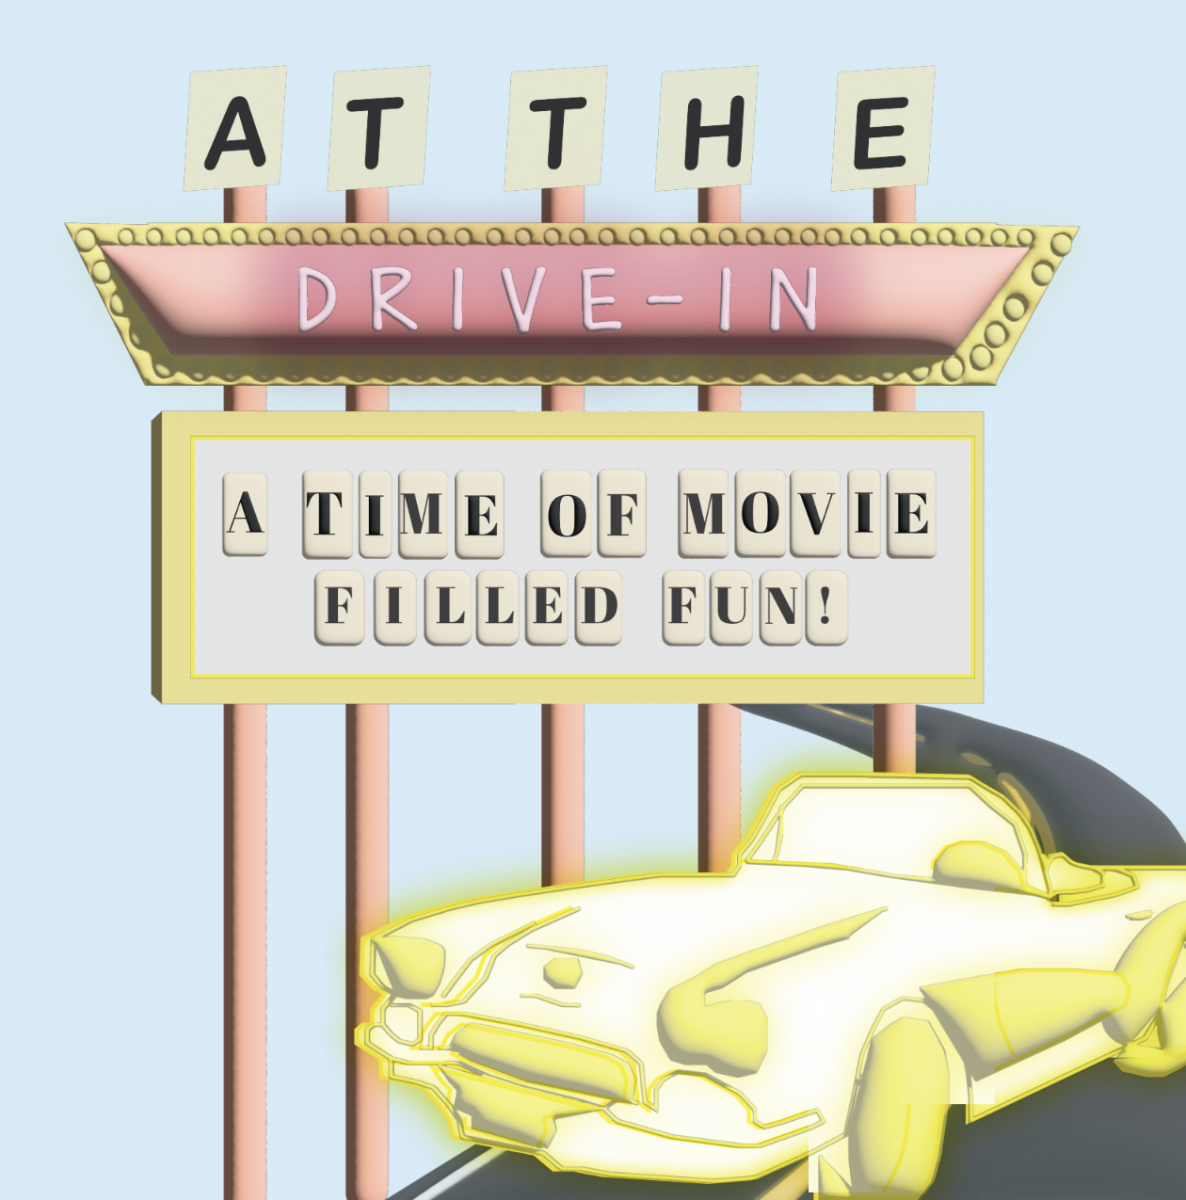 At The Drive-In: A Time of Movie Filled Fun 